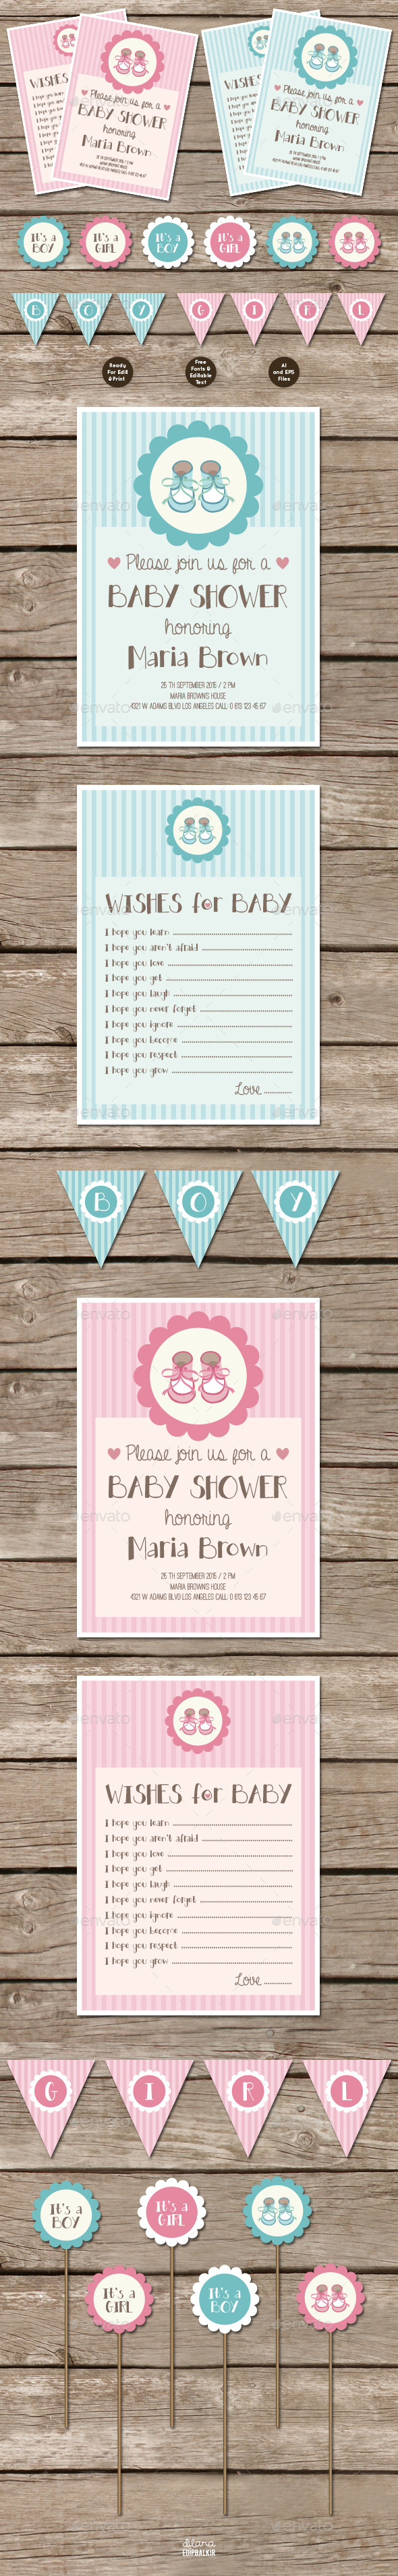 Baby Shower Invitation Cards & Party Templates